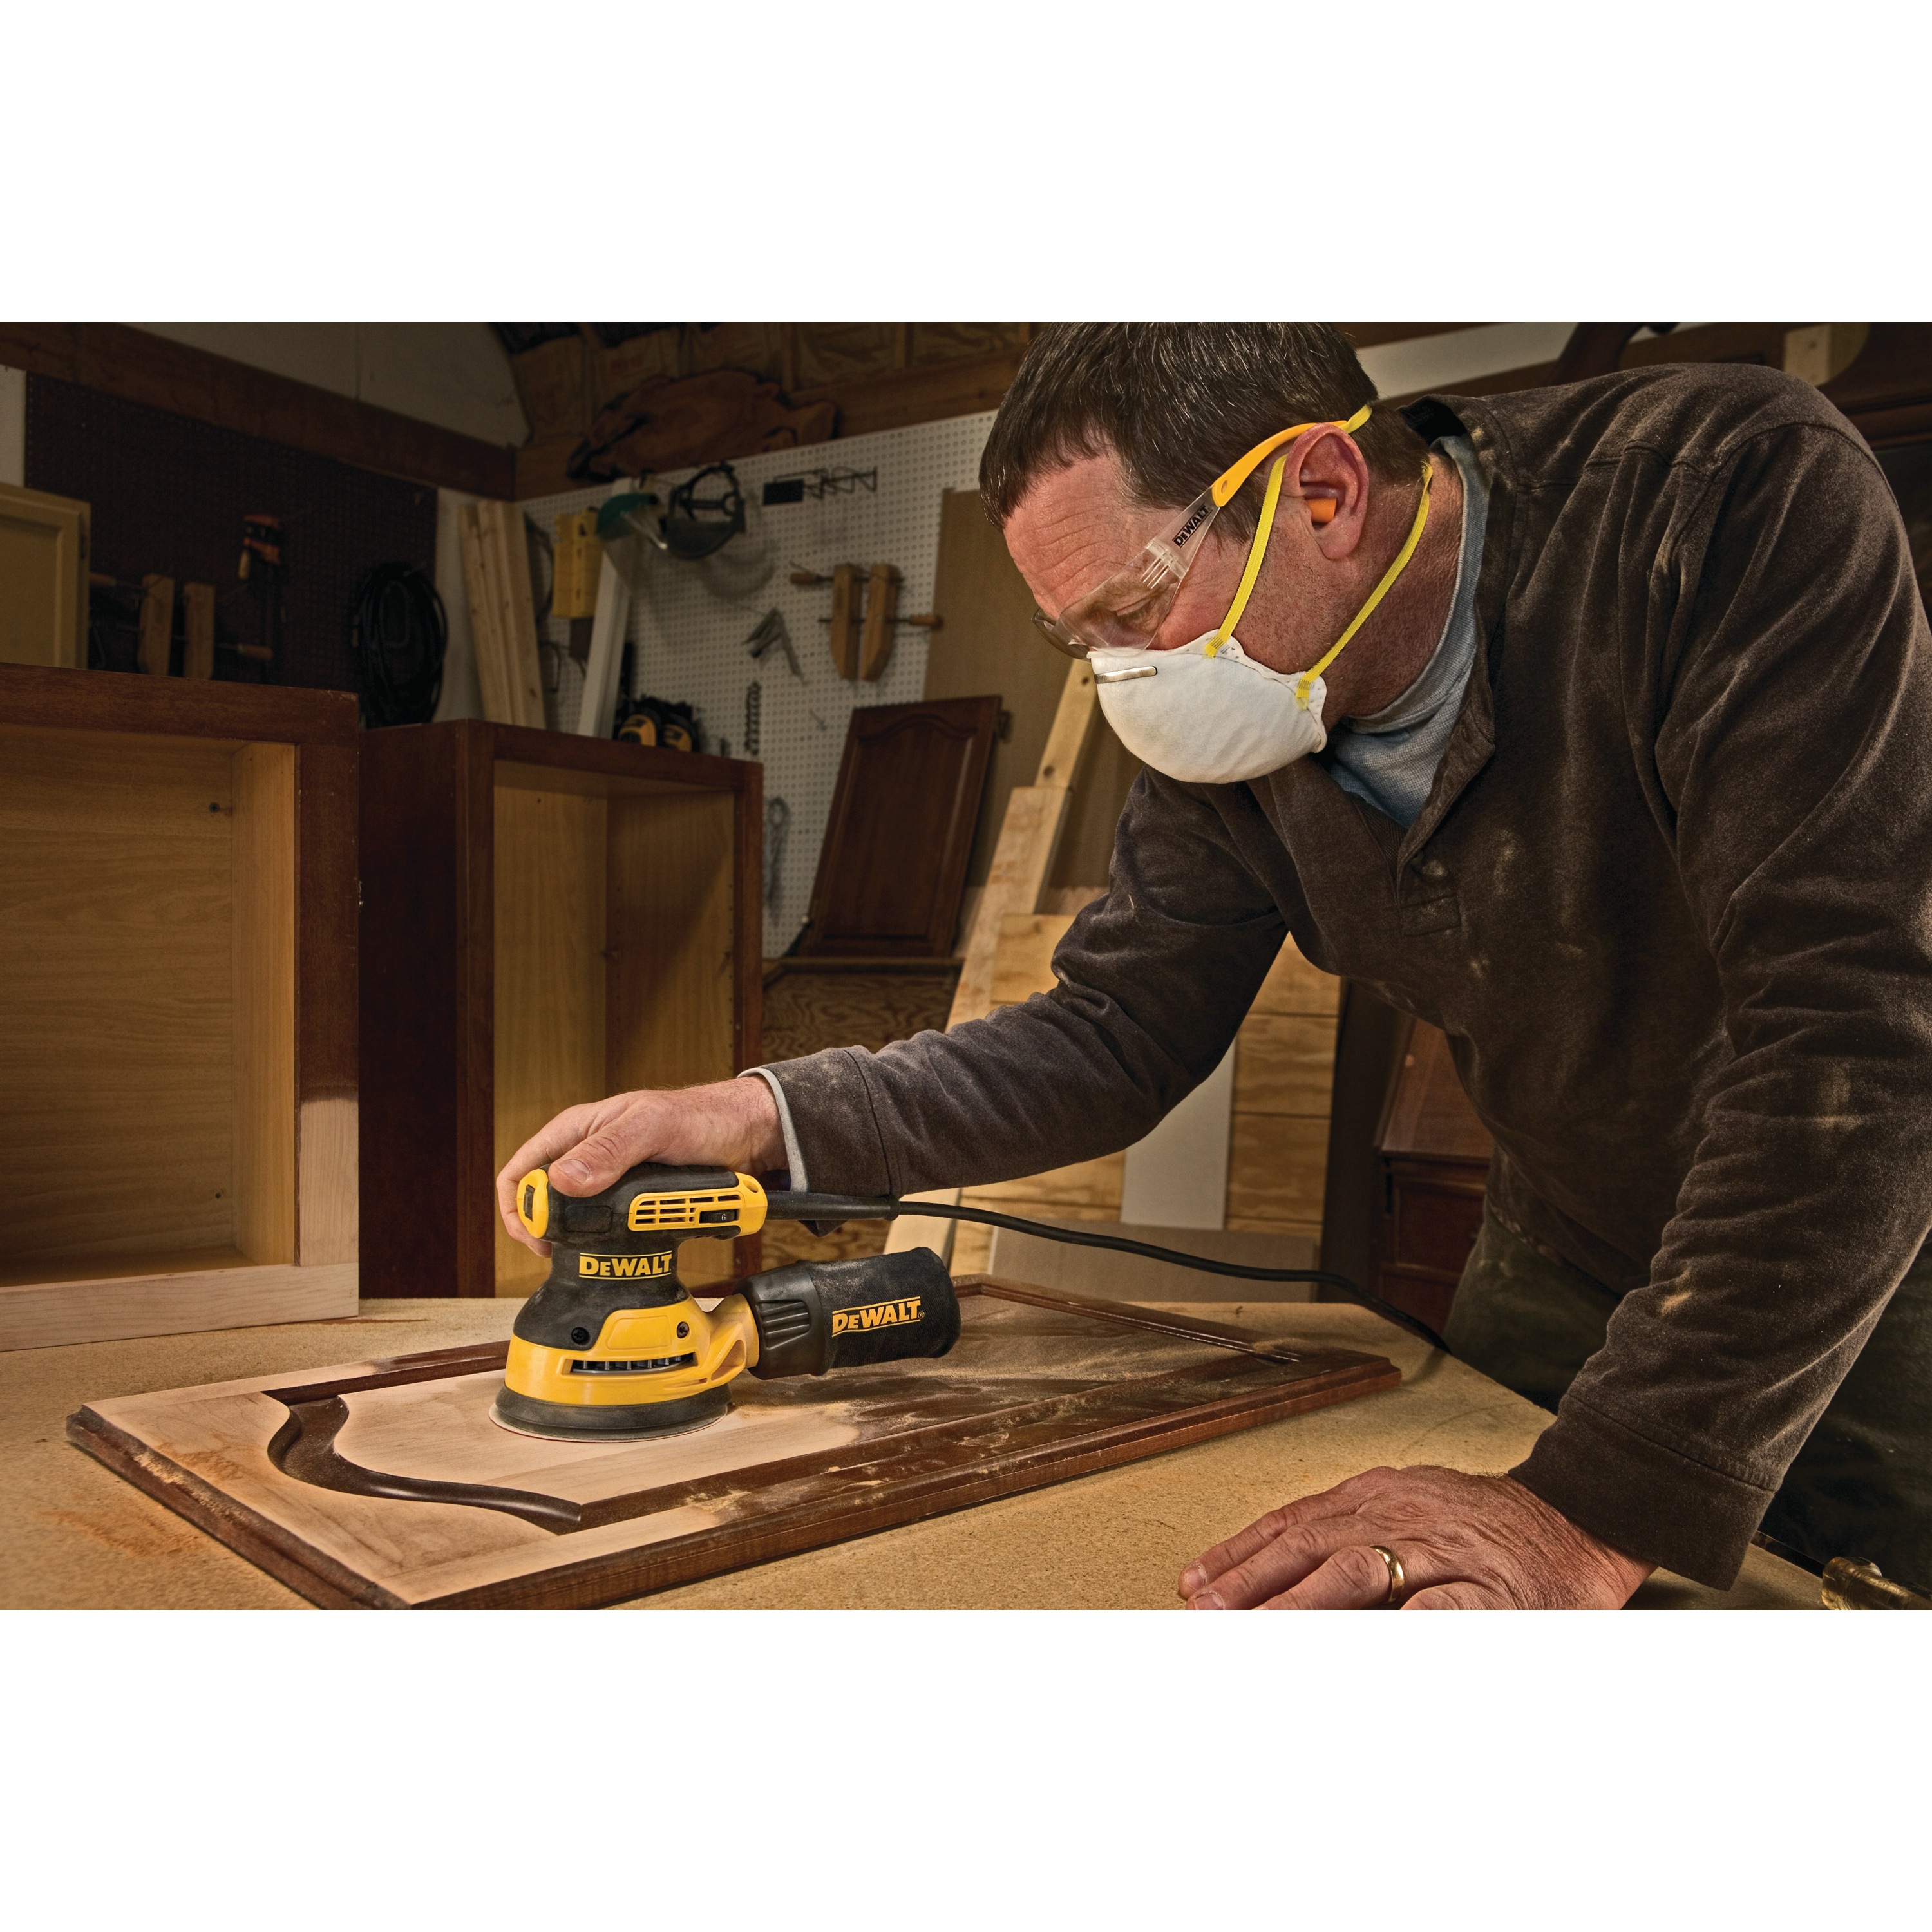 5 inch variable speed random orbit sander with H and L pad being used to sand a wooden panel by a worker at a worksite.